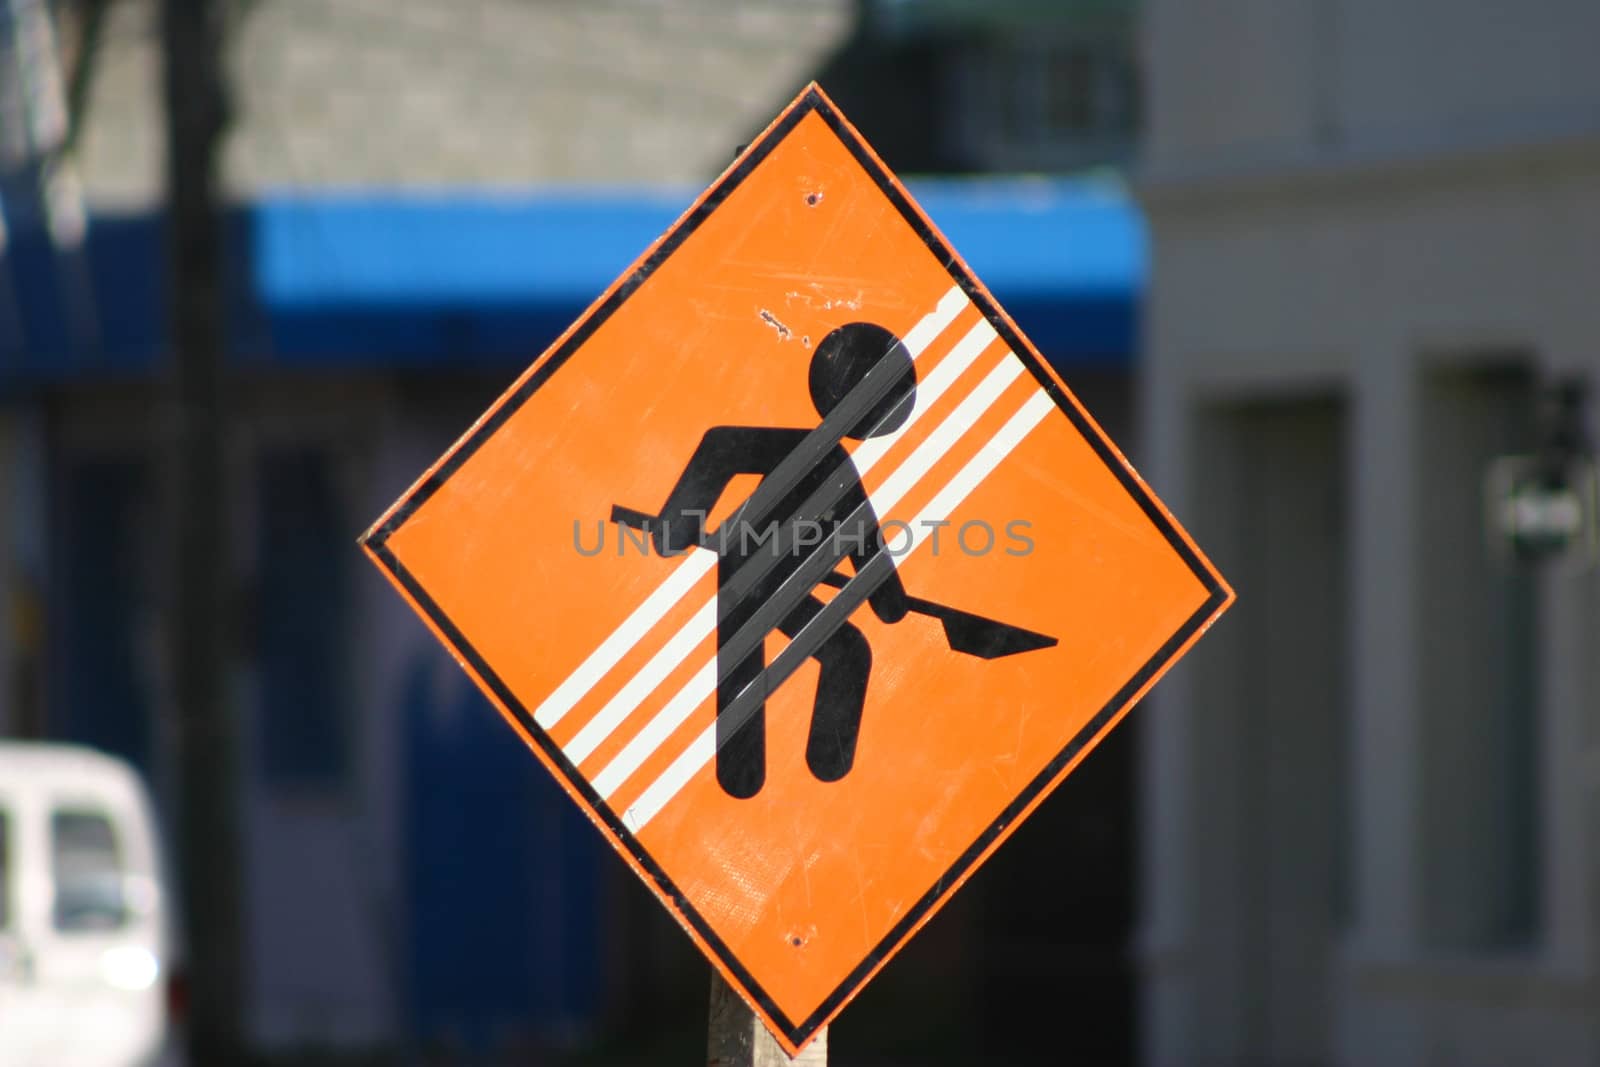 Workman Sign or Under construction sign with blurred background